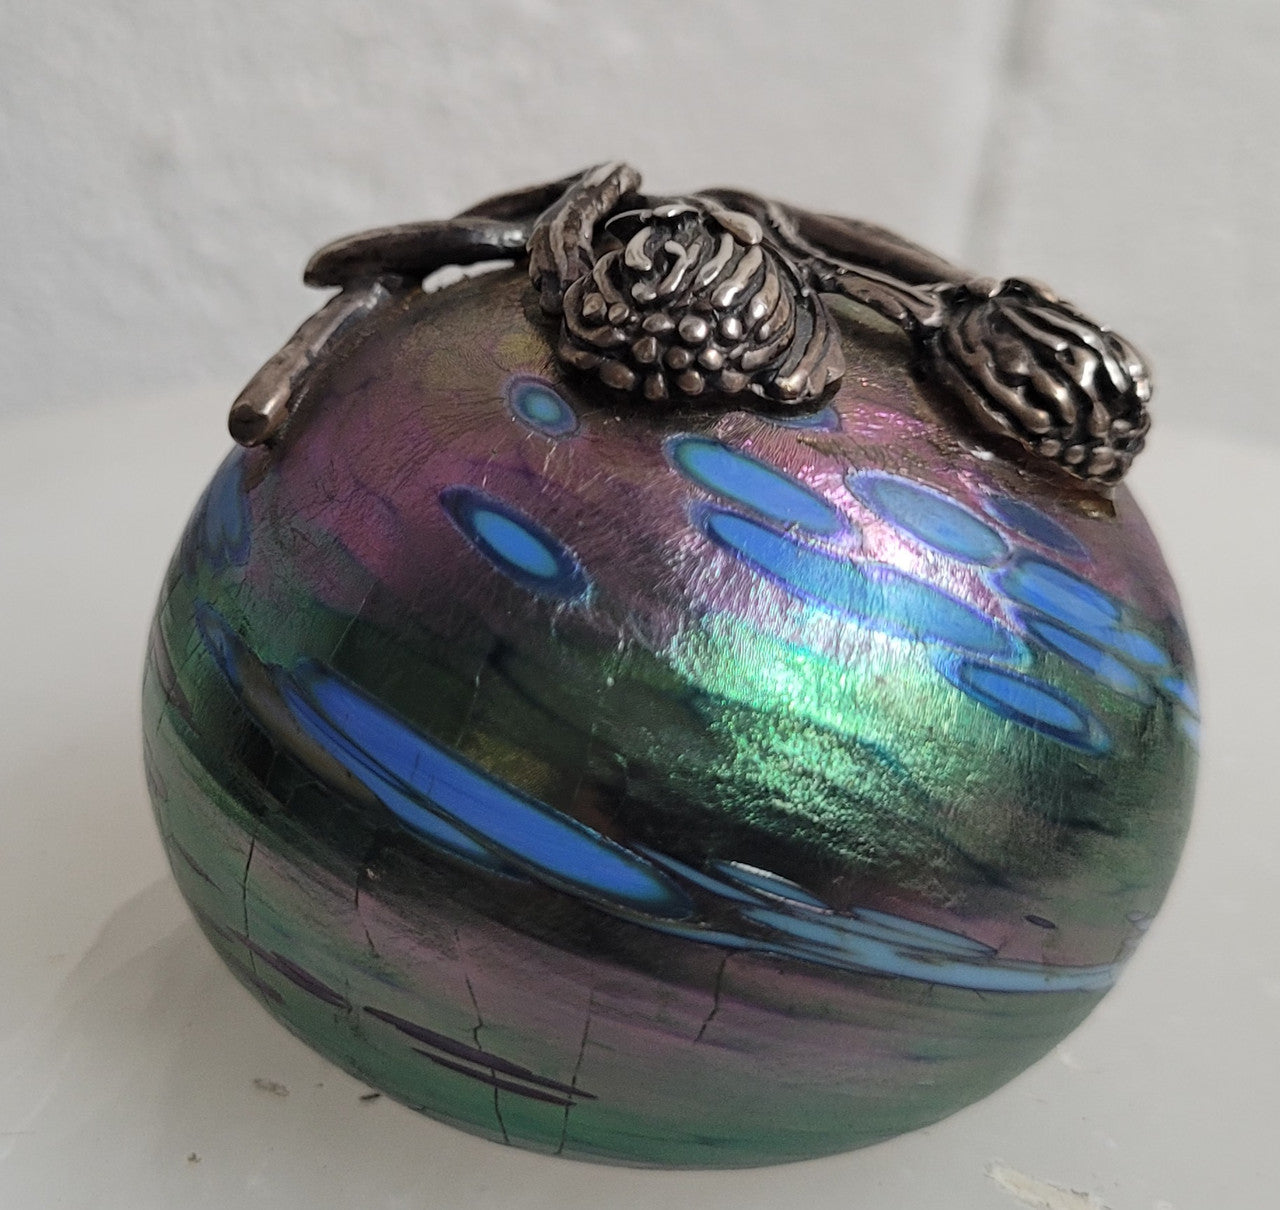 Vintage Iridescent Colin Heaney Paperweight with Sterling Silver Waratah flower by Suzanne Brett